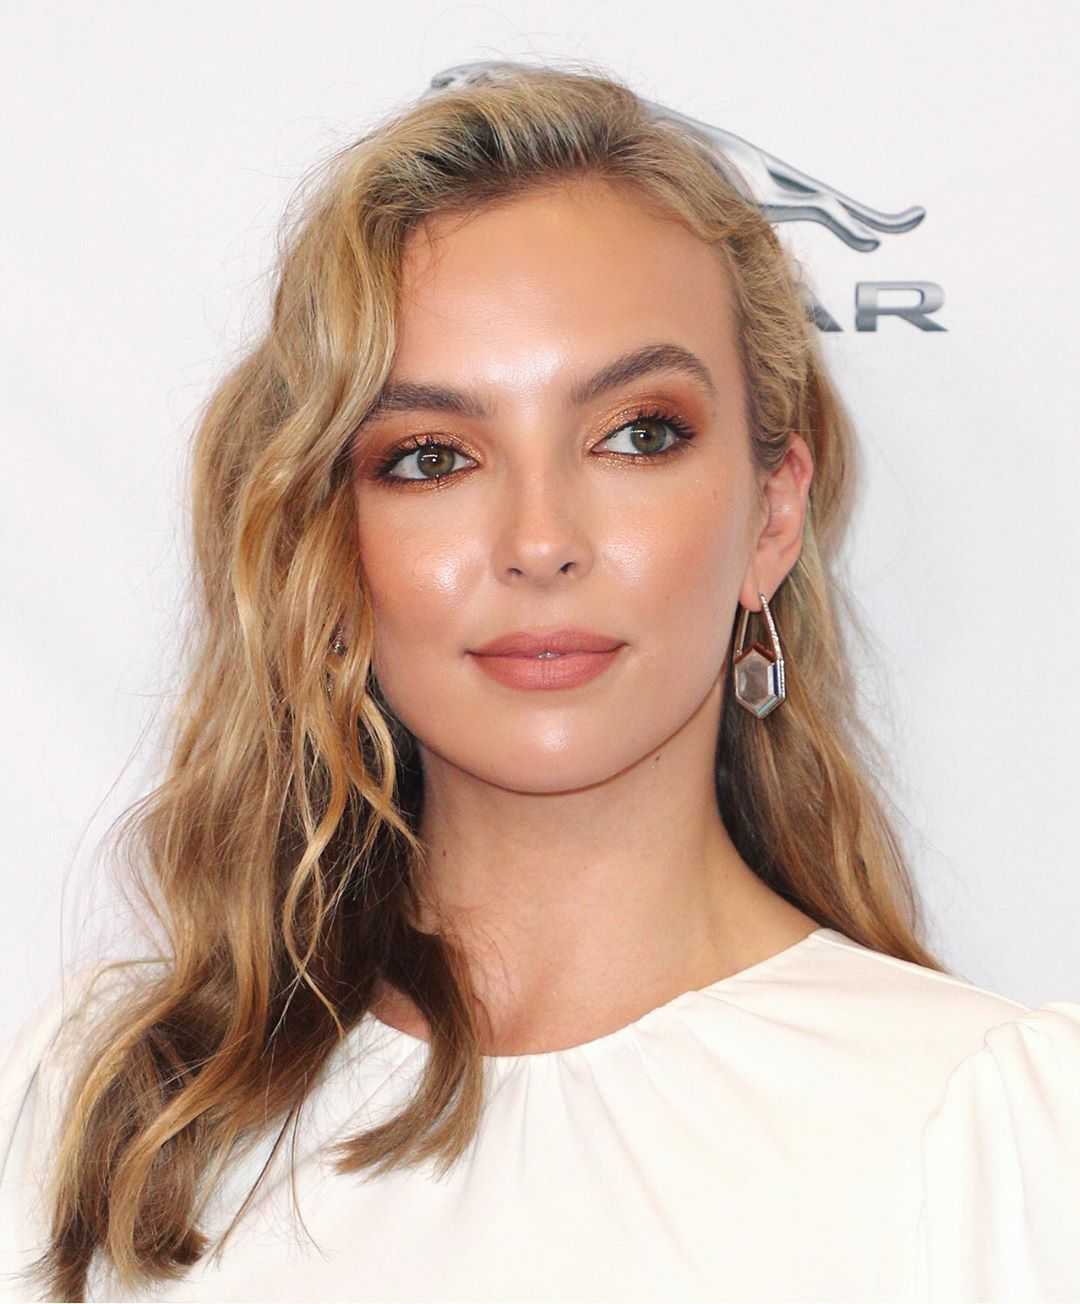 70+ Hot Pictures Of Jodie Comer Which Will Make You Sweat All Over 161